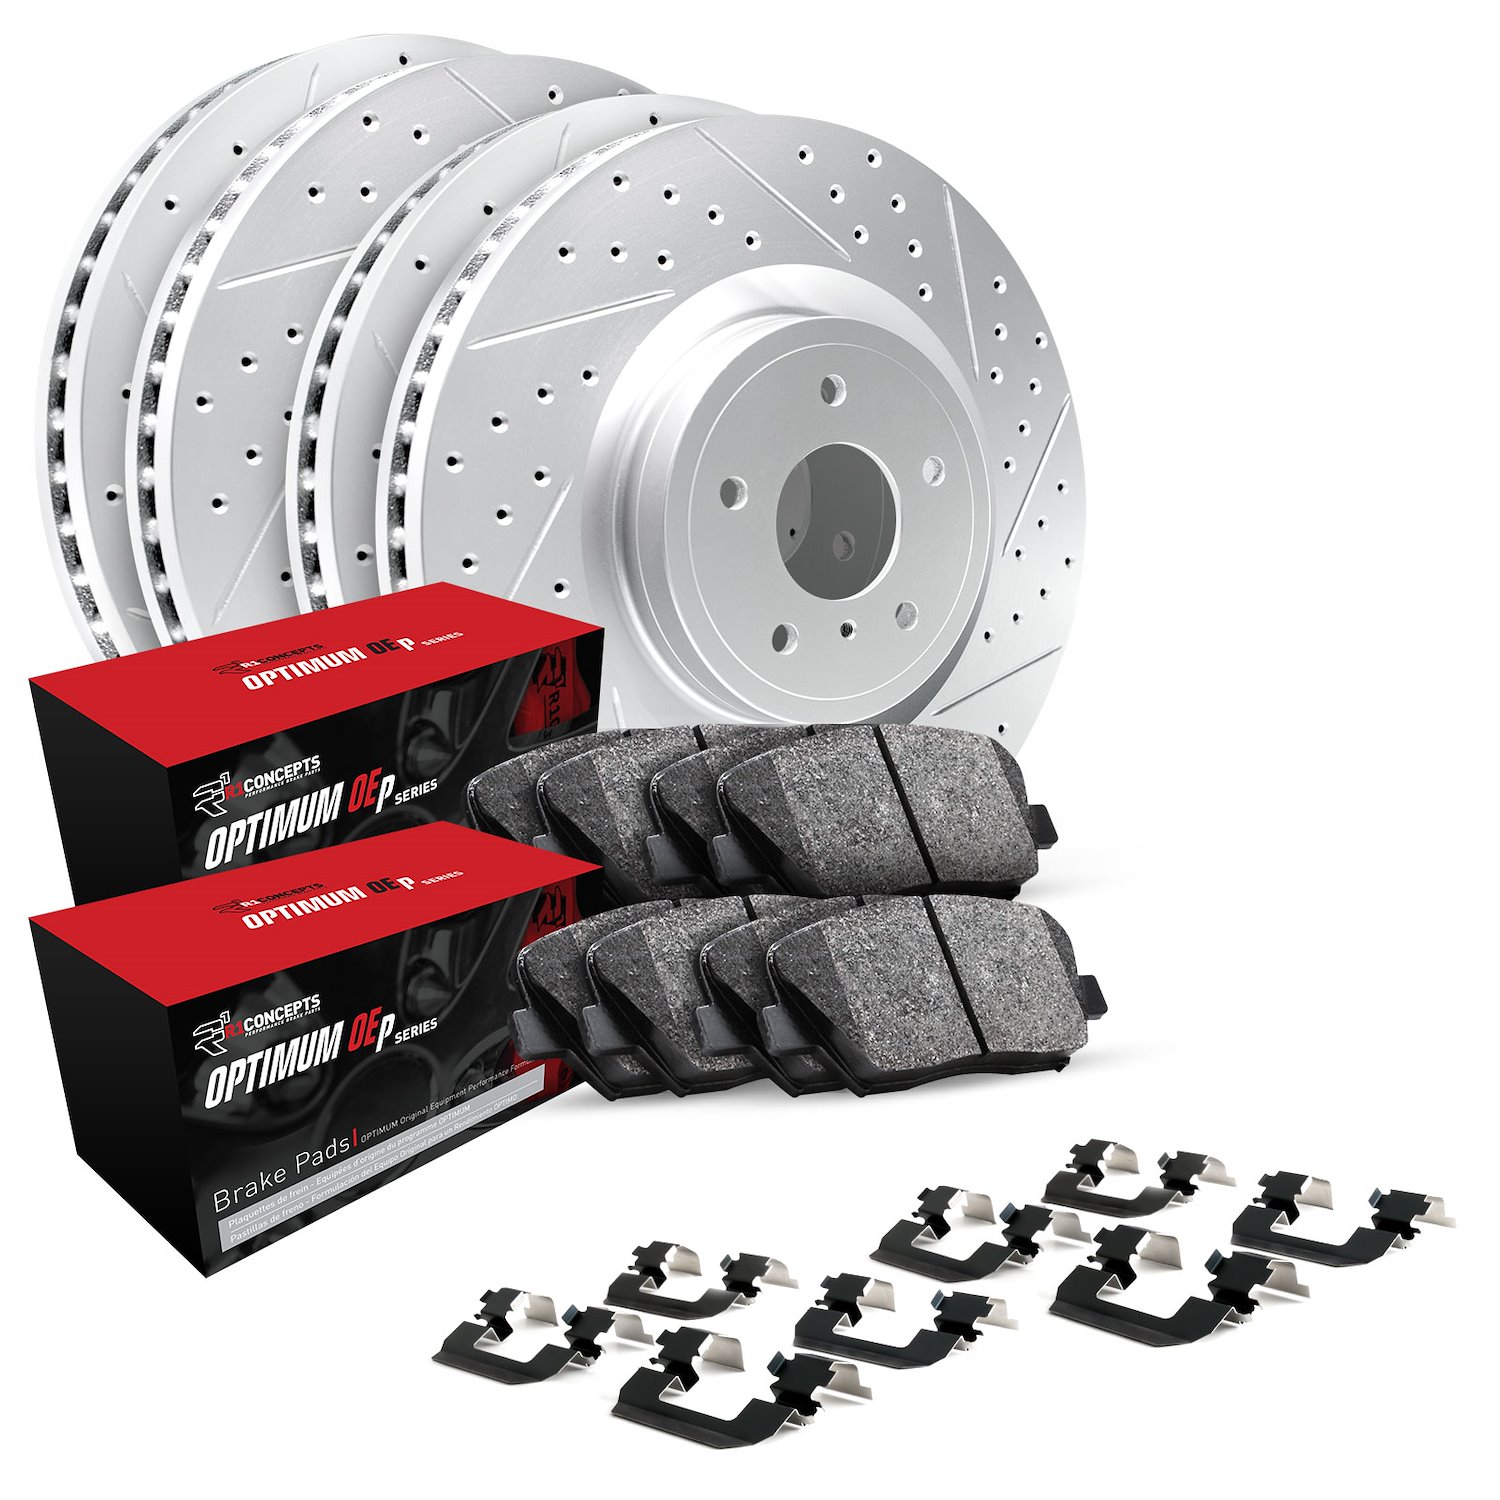 GEO-Carbon Drilled/Slotted Rotors/Drums w/Optimum OE Pads/Shoes/Hardware, 1998-2001 Kia/Hyundai/Genesis, Position: Front/Rear